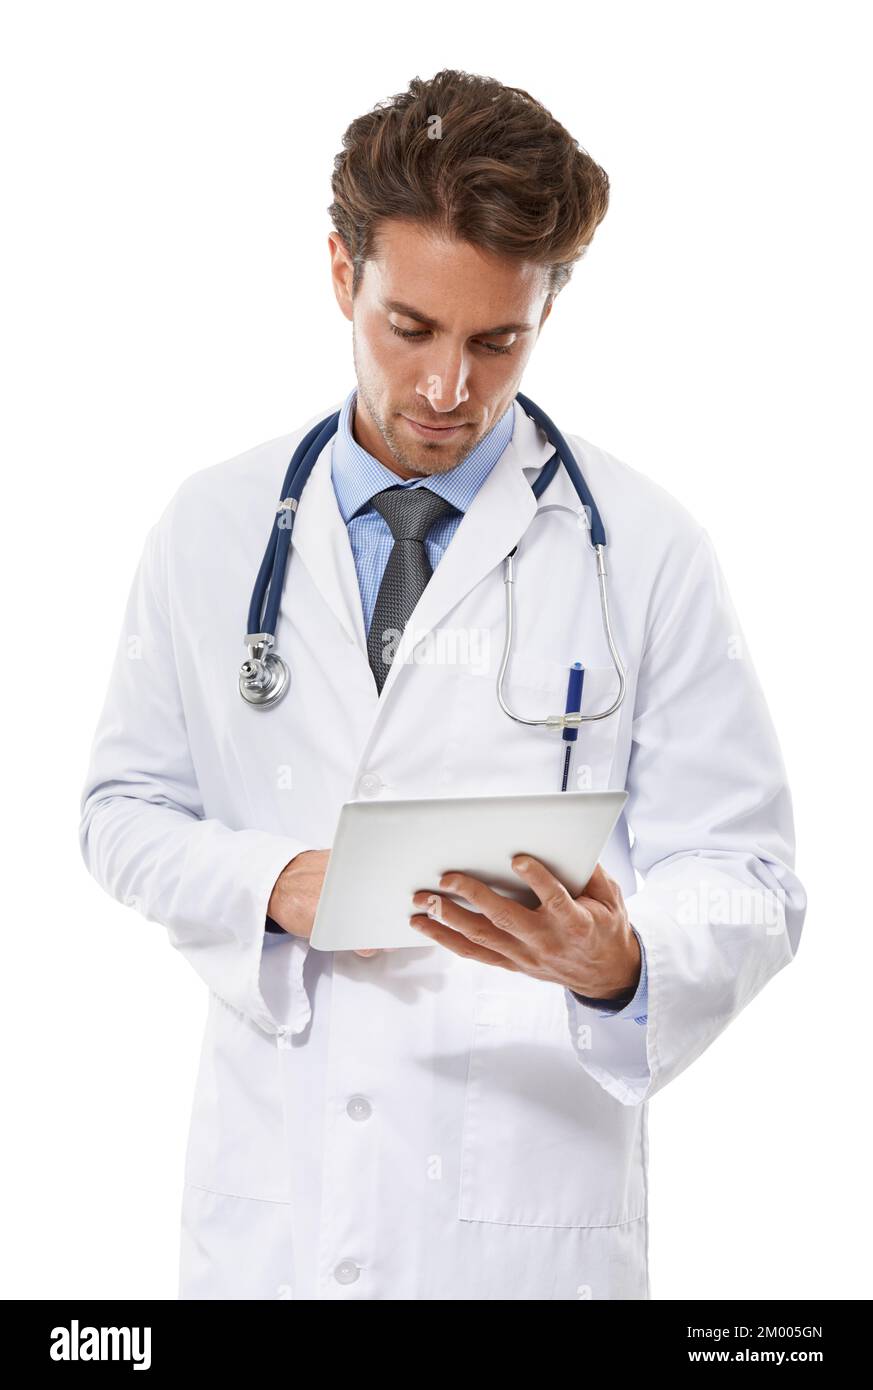 Keeping abreast of medicine with new technology. a serious-looking doctor looking at a clipboard he is holding. Stock Photo